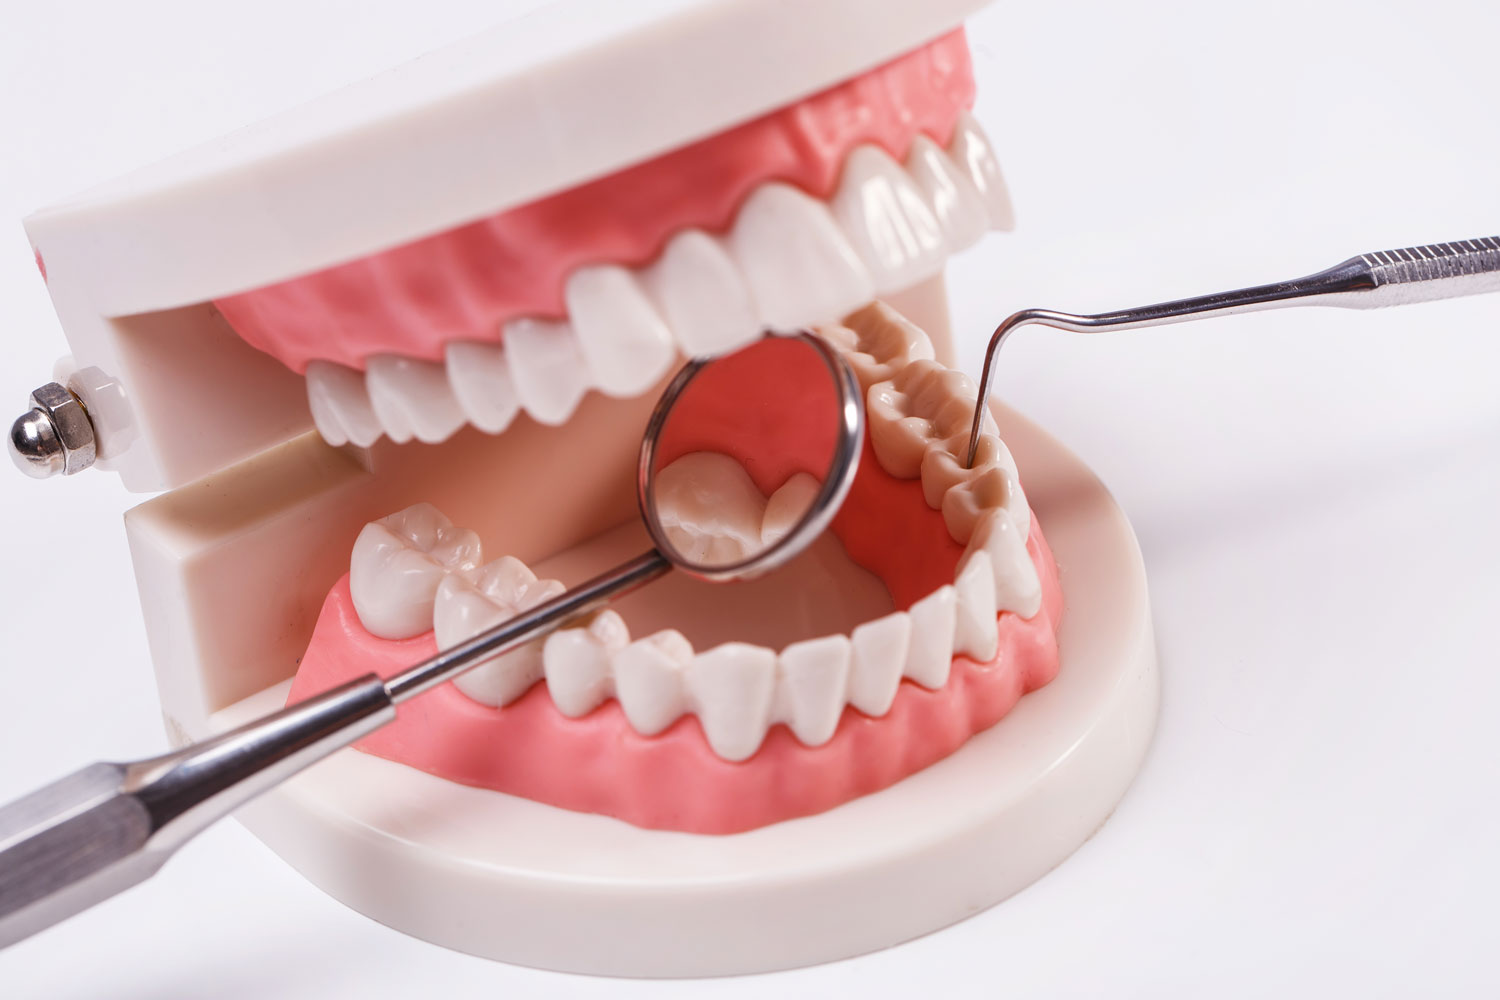 What Are Dental Prostheses? How Is It Treated?